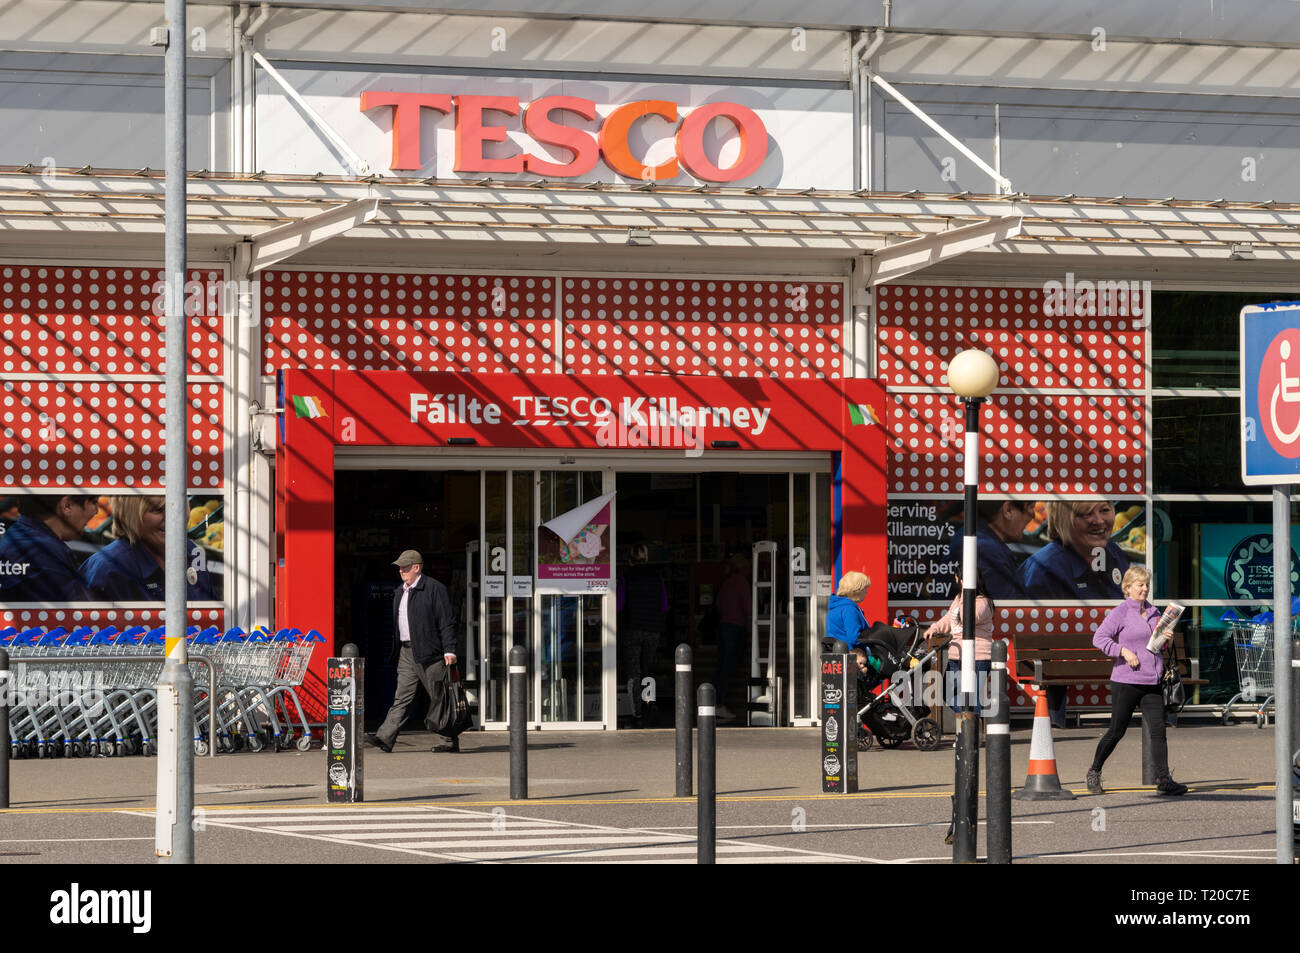 Tesco logo unusual bright red entrance. Customers at Tesco red store front in Killarney DeerPark shopping centre on sunny day. Killarney  County Kerry Stock Photo